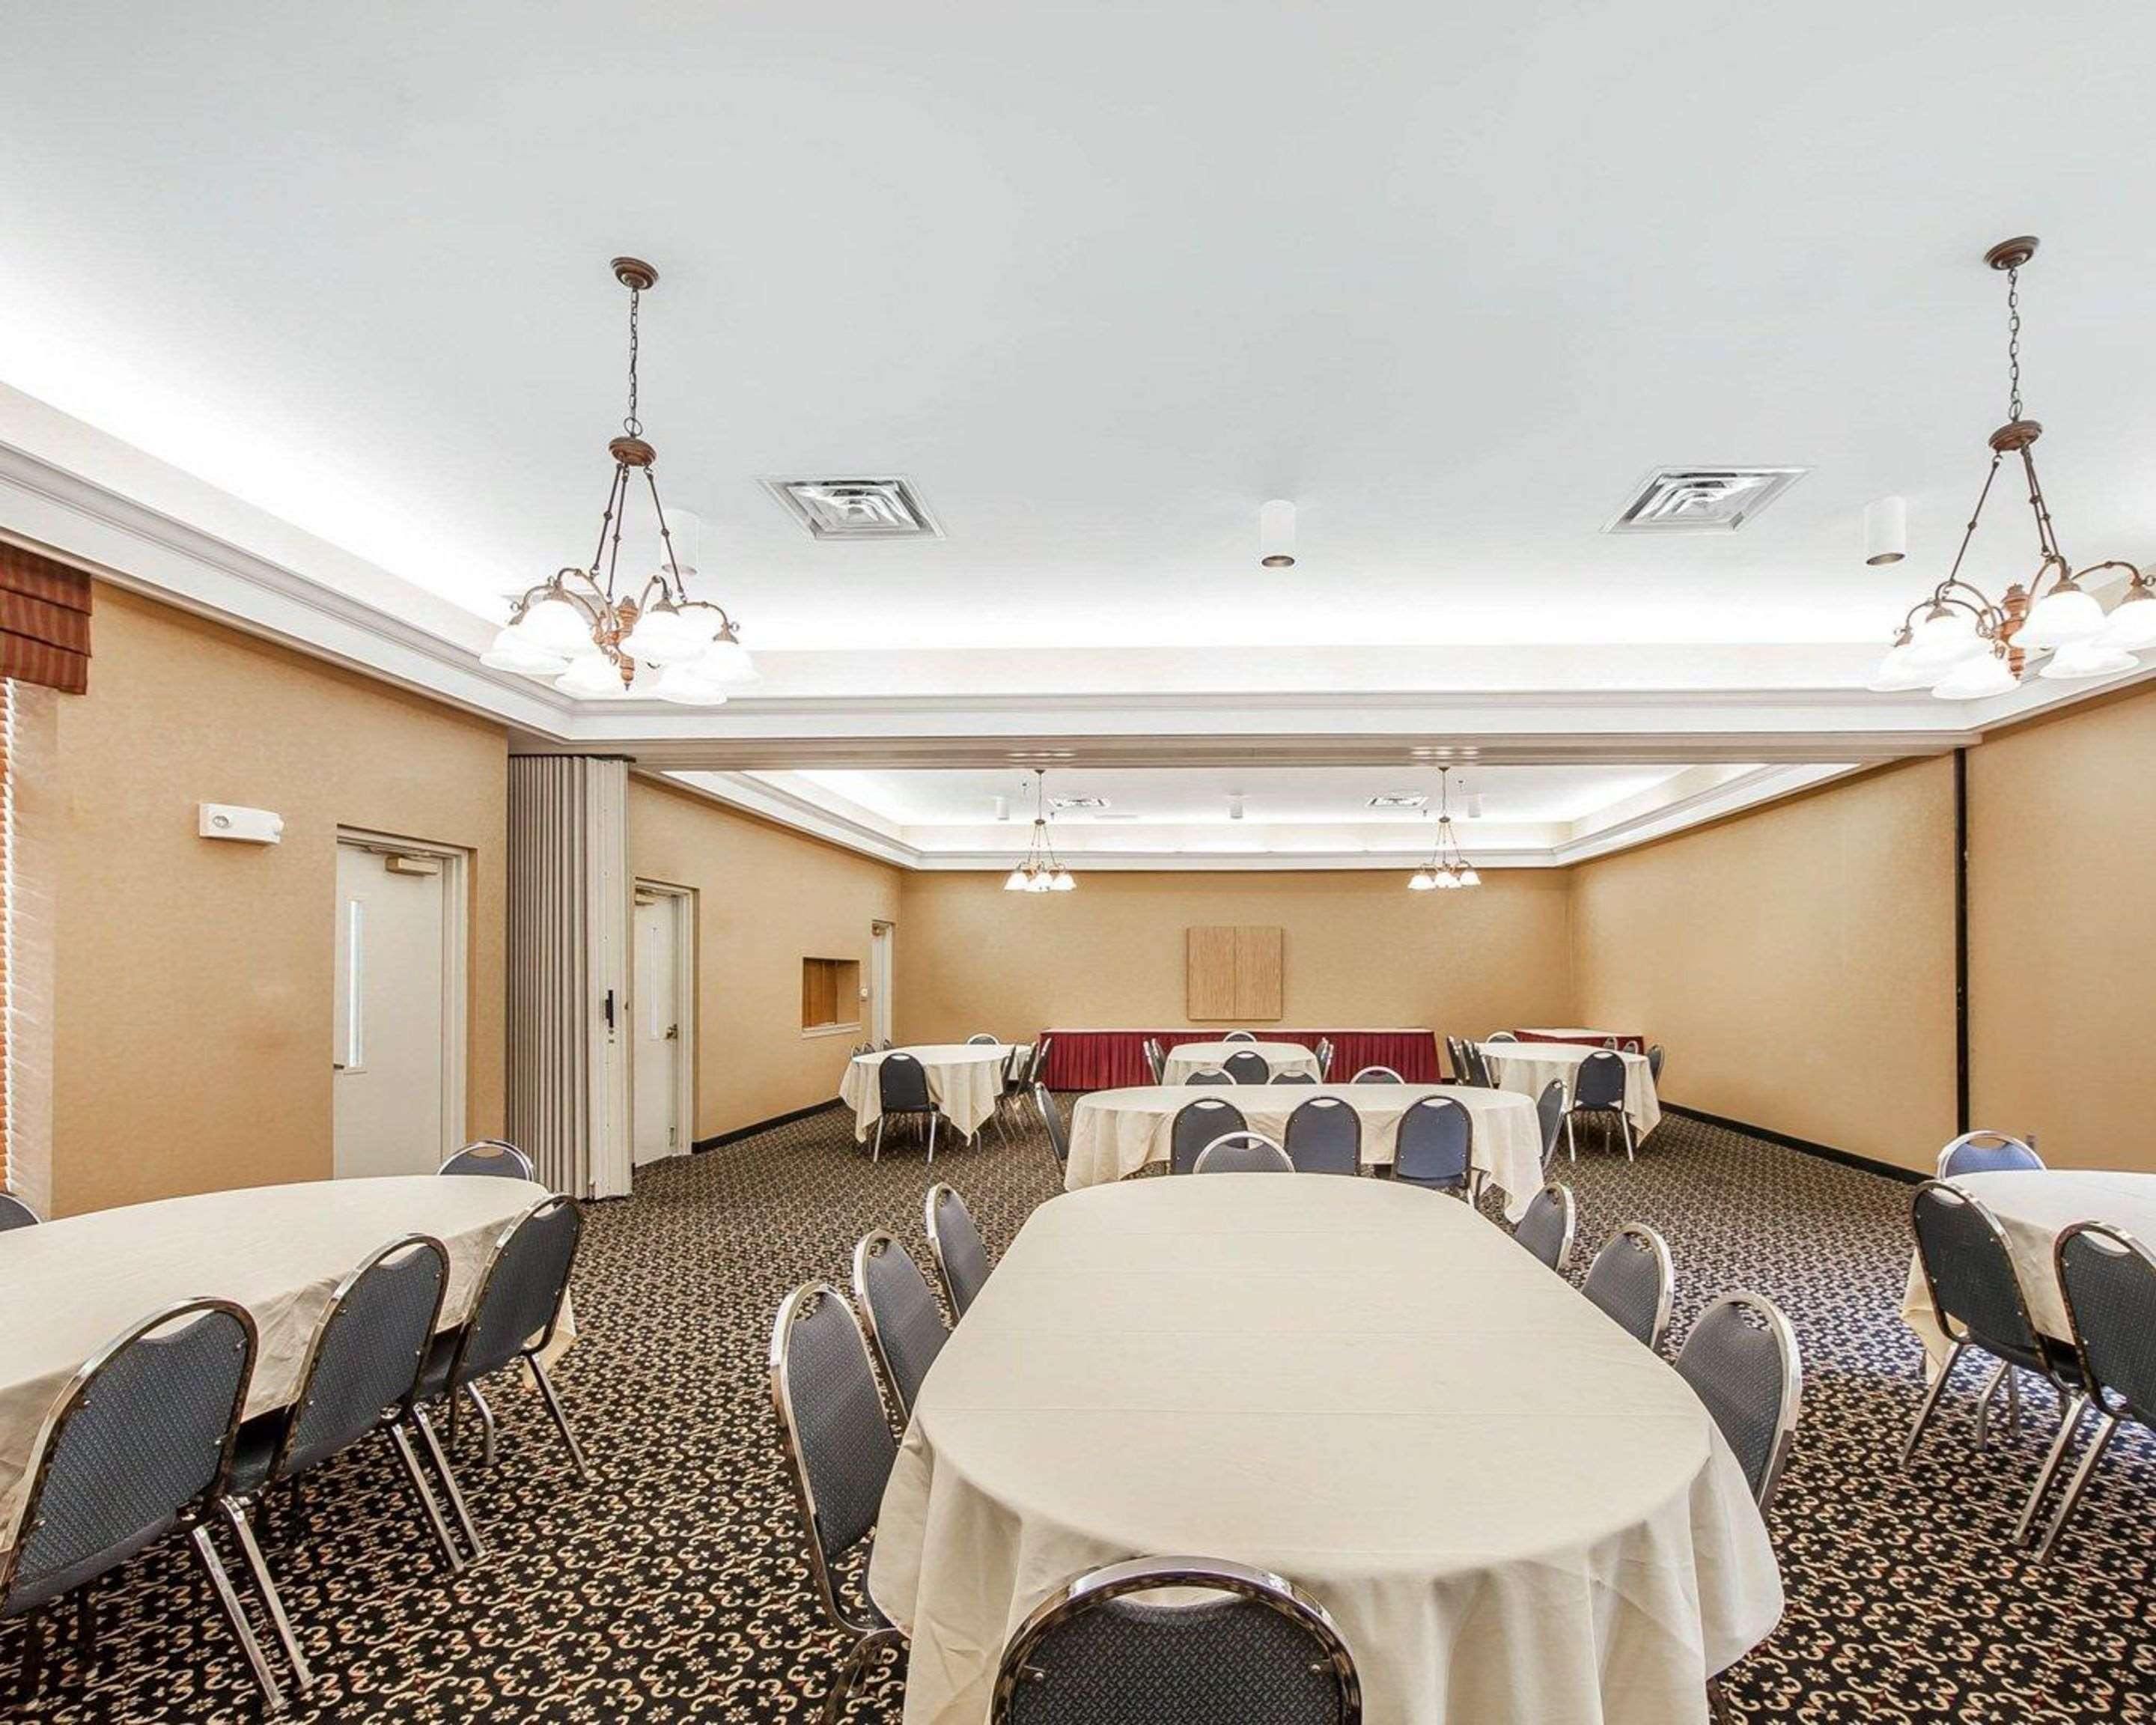 Mainstay Suites Conference Center Photo